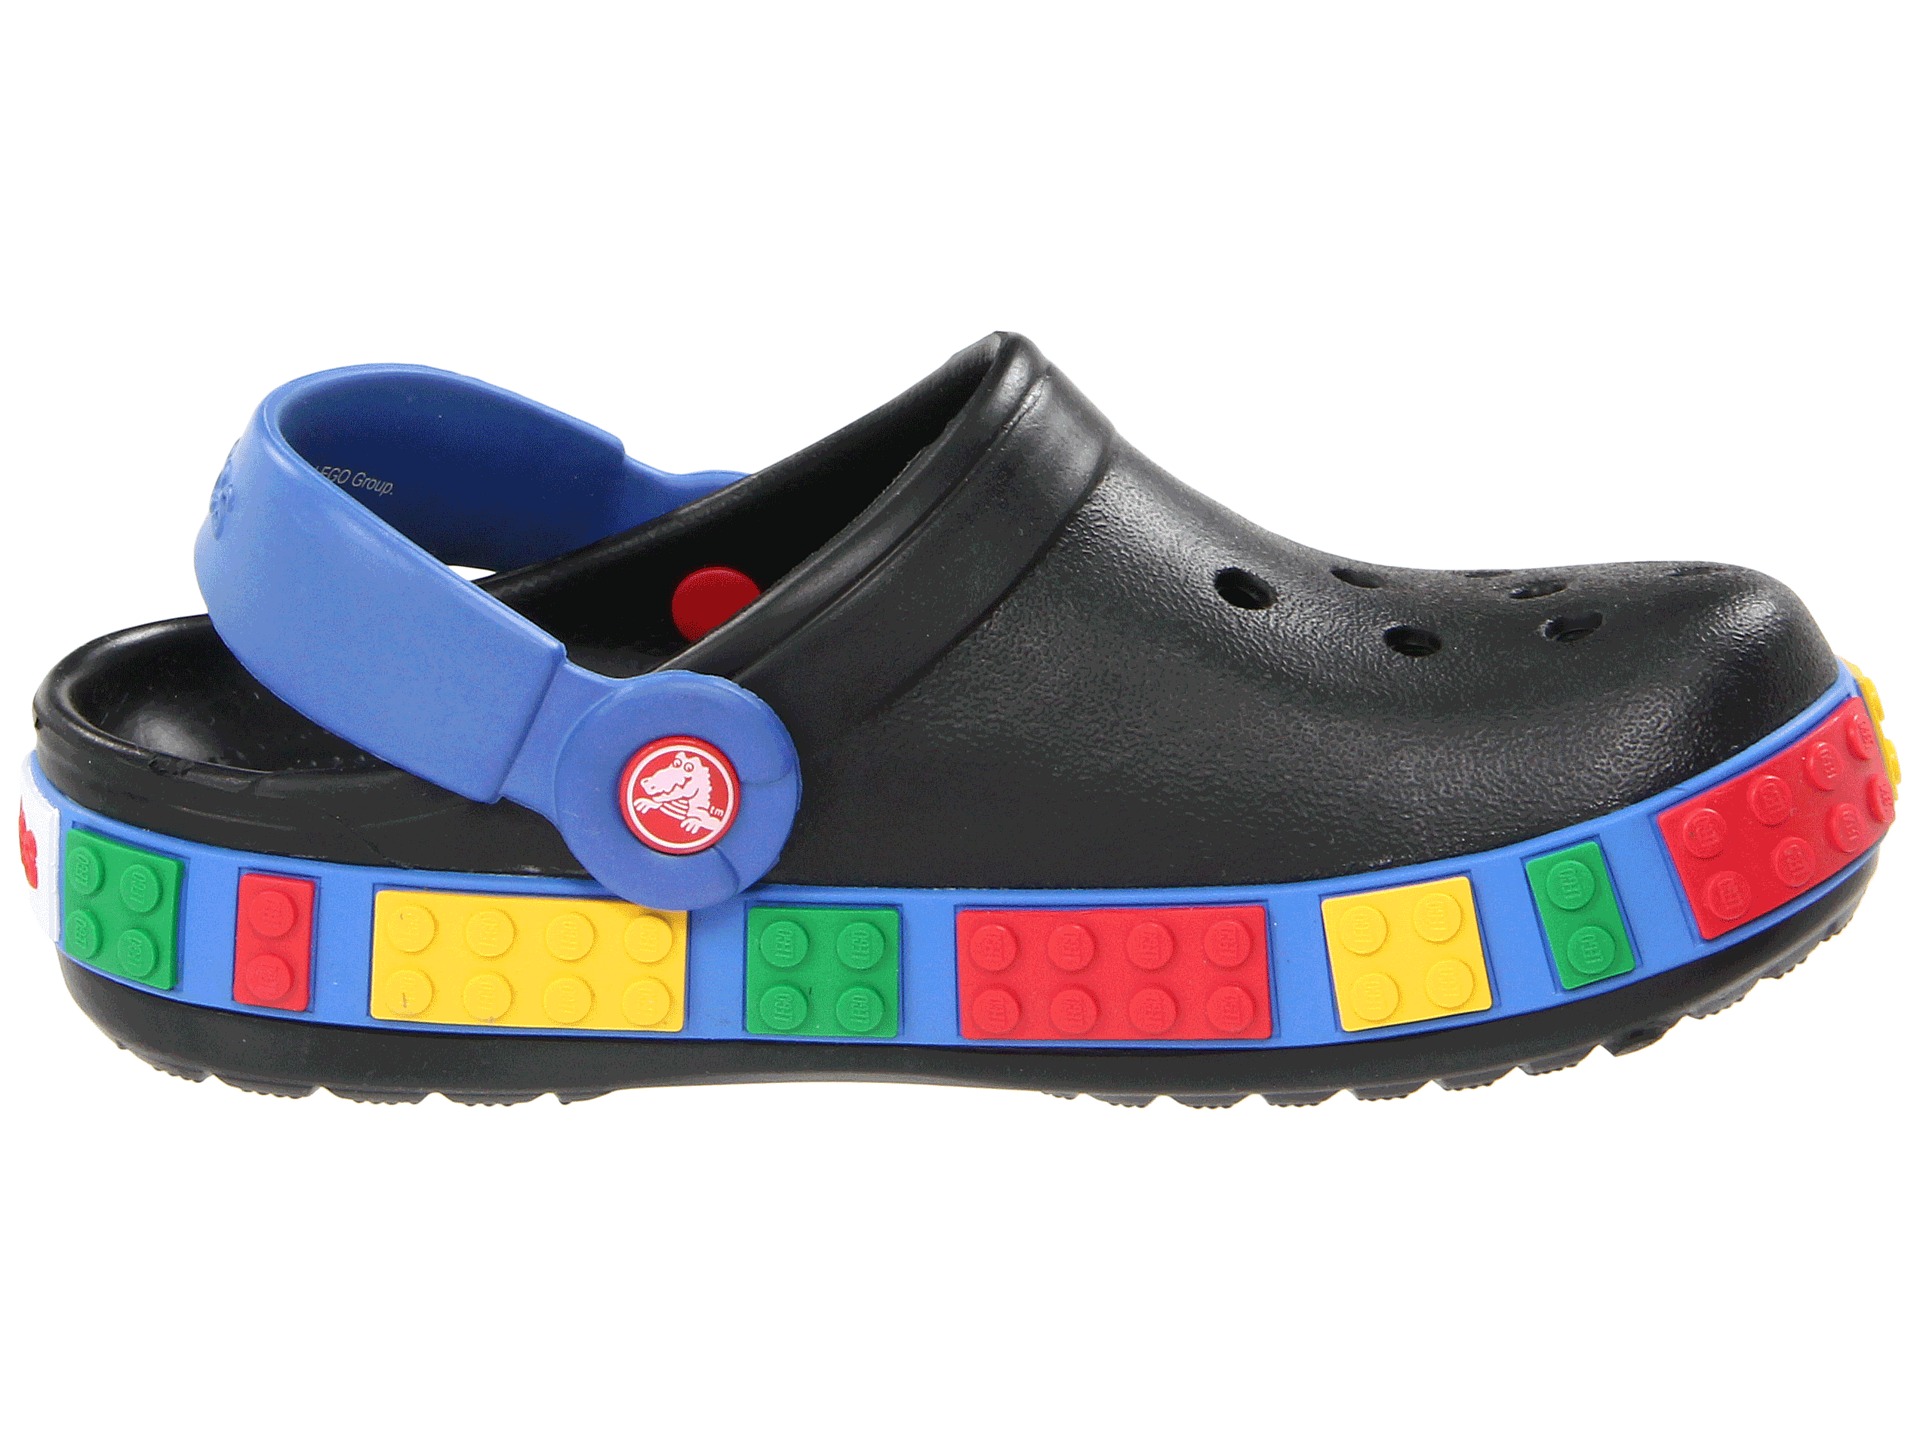 Crocs Kids Crocband Lego Toddler Little Kid | Shipped Free at Zappos